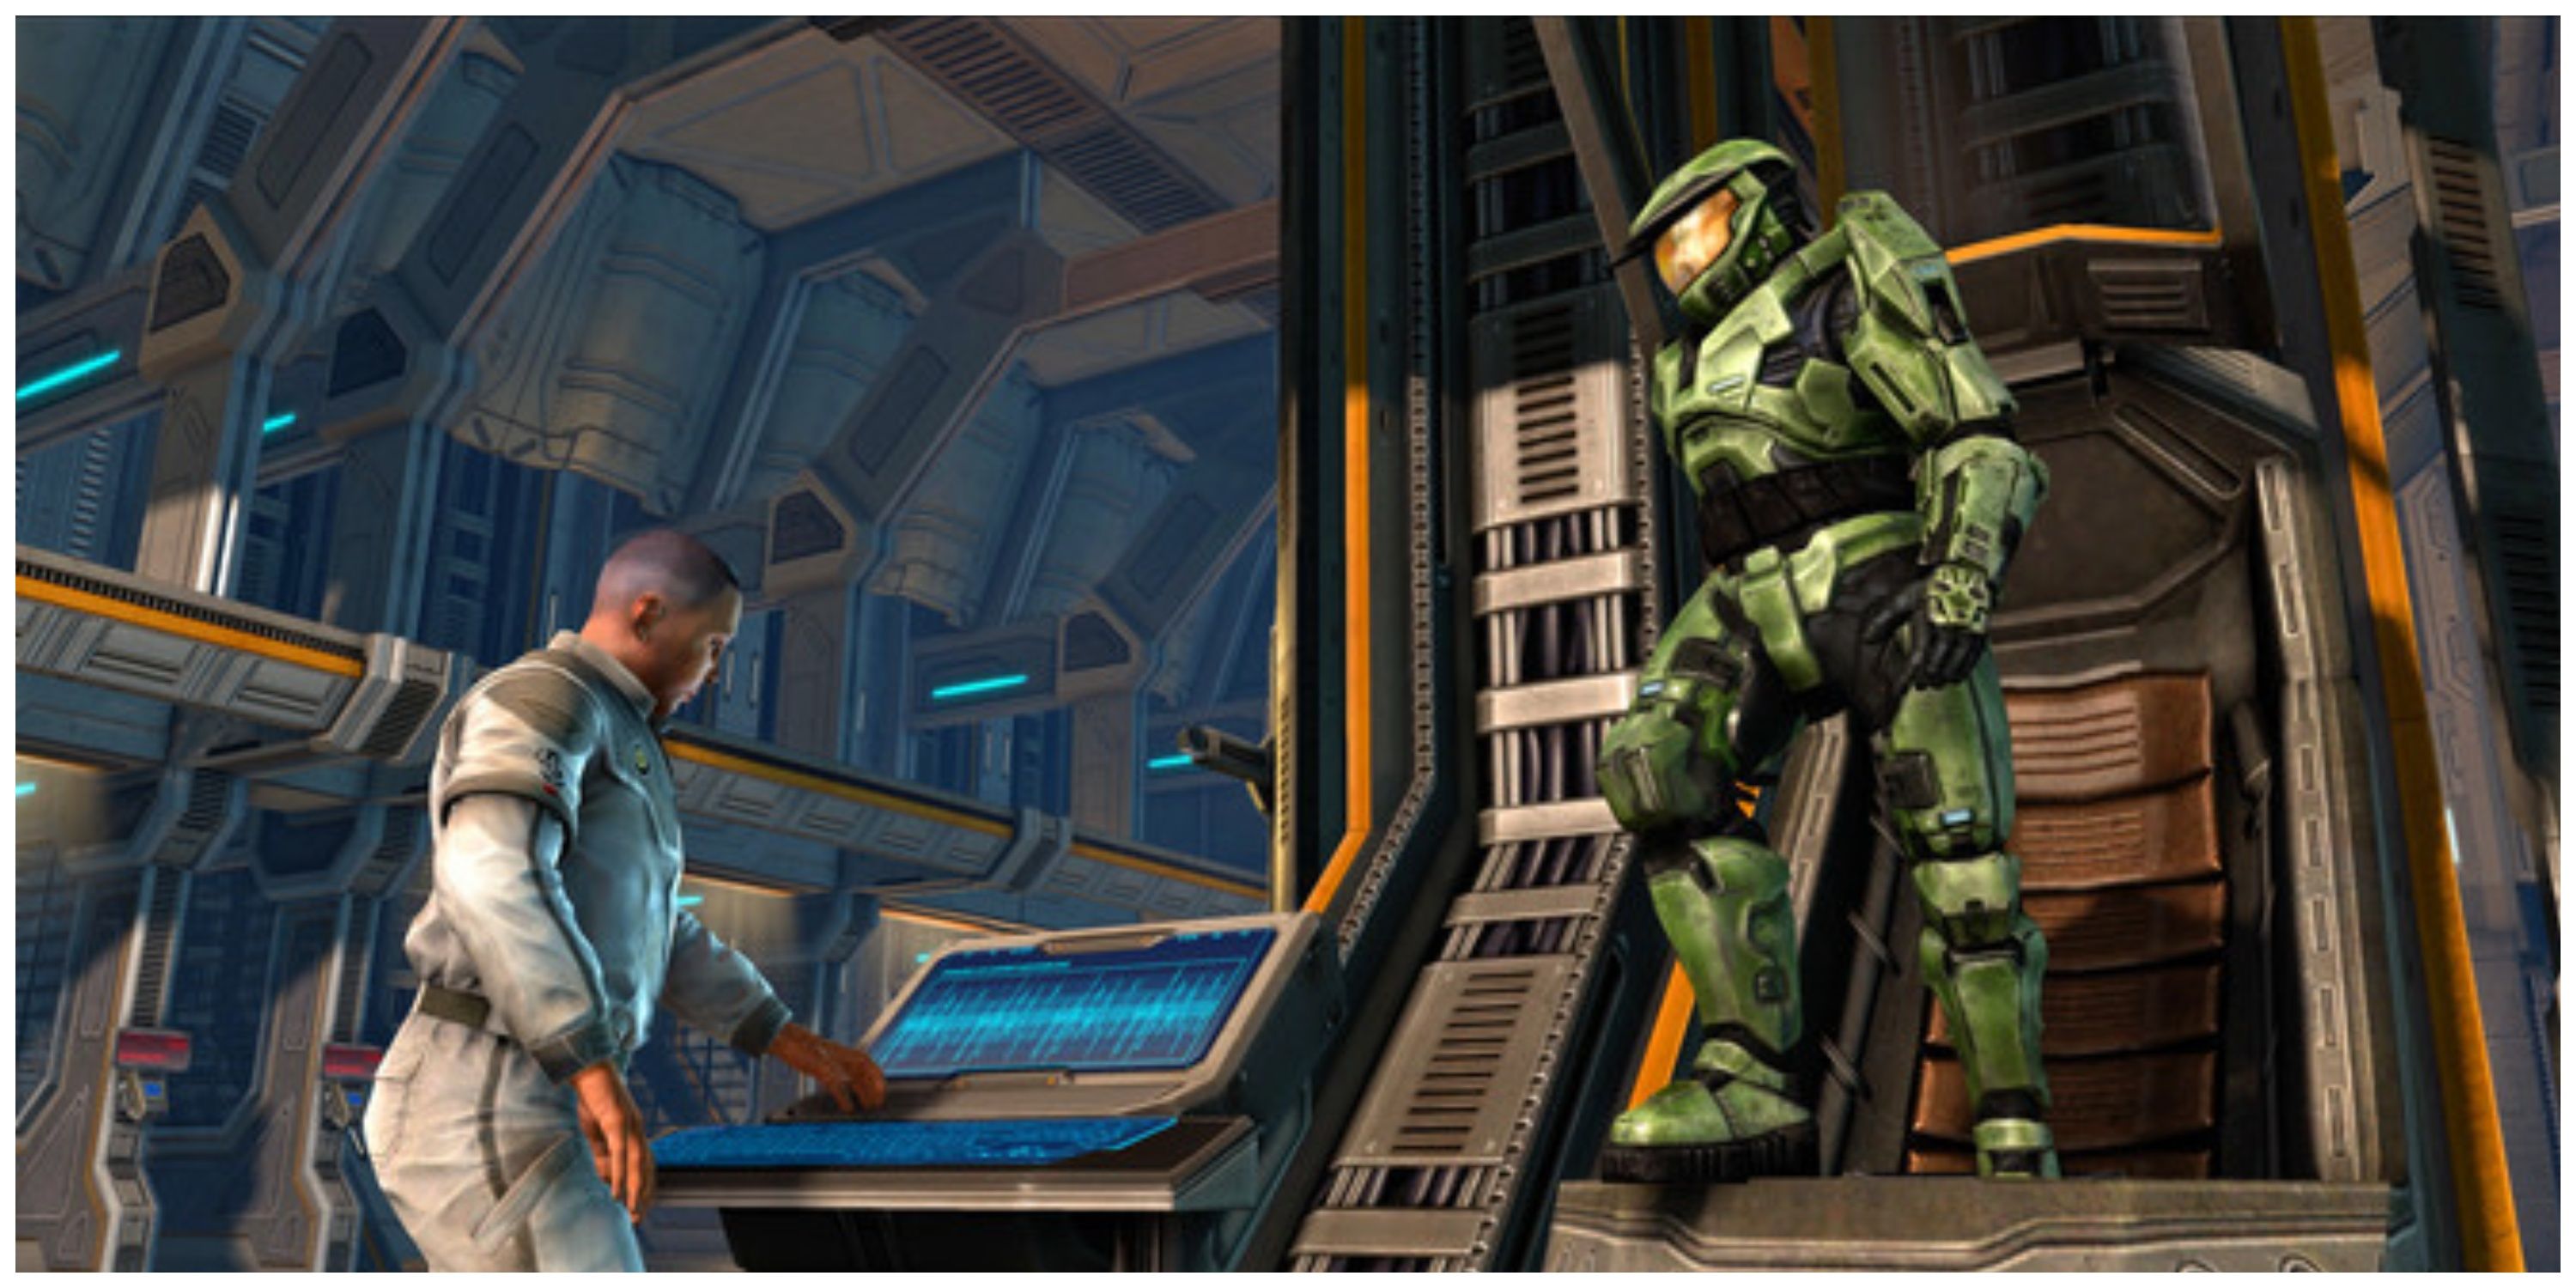 Halo: The Master Chief Collection - Steam Store Page Screenshot (Master Chief Stepping Out Of A Chamber)